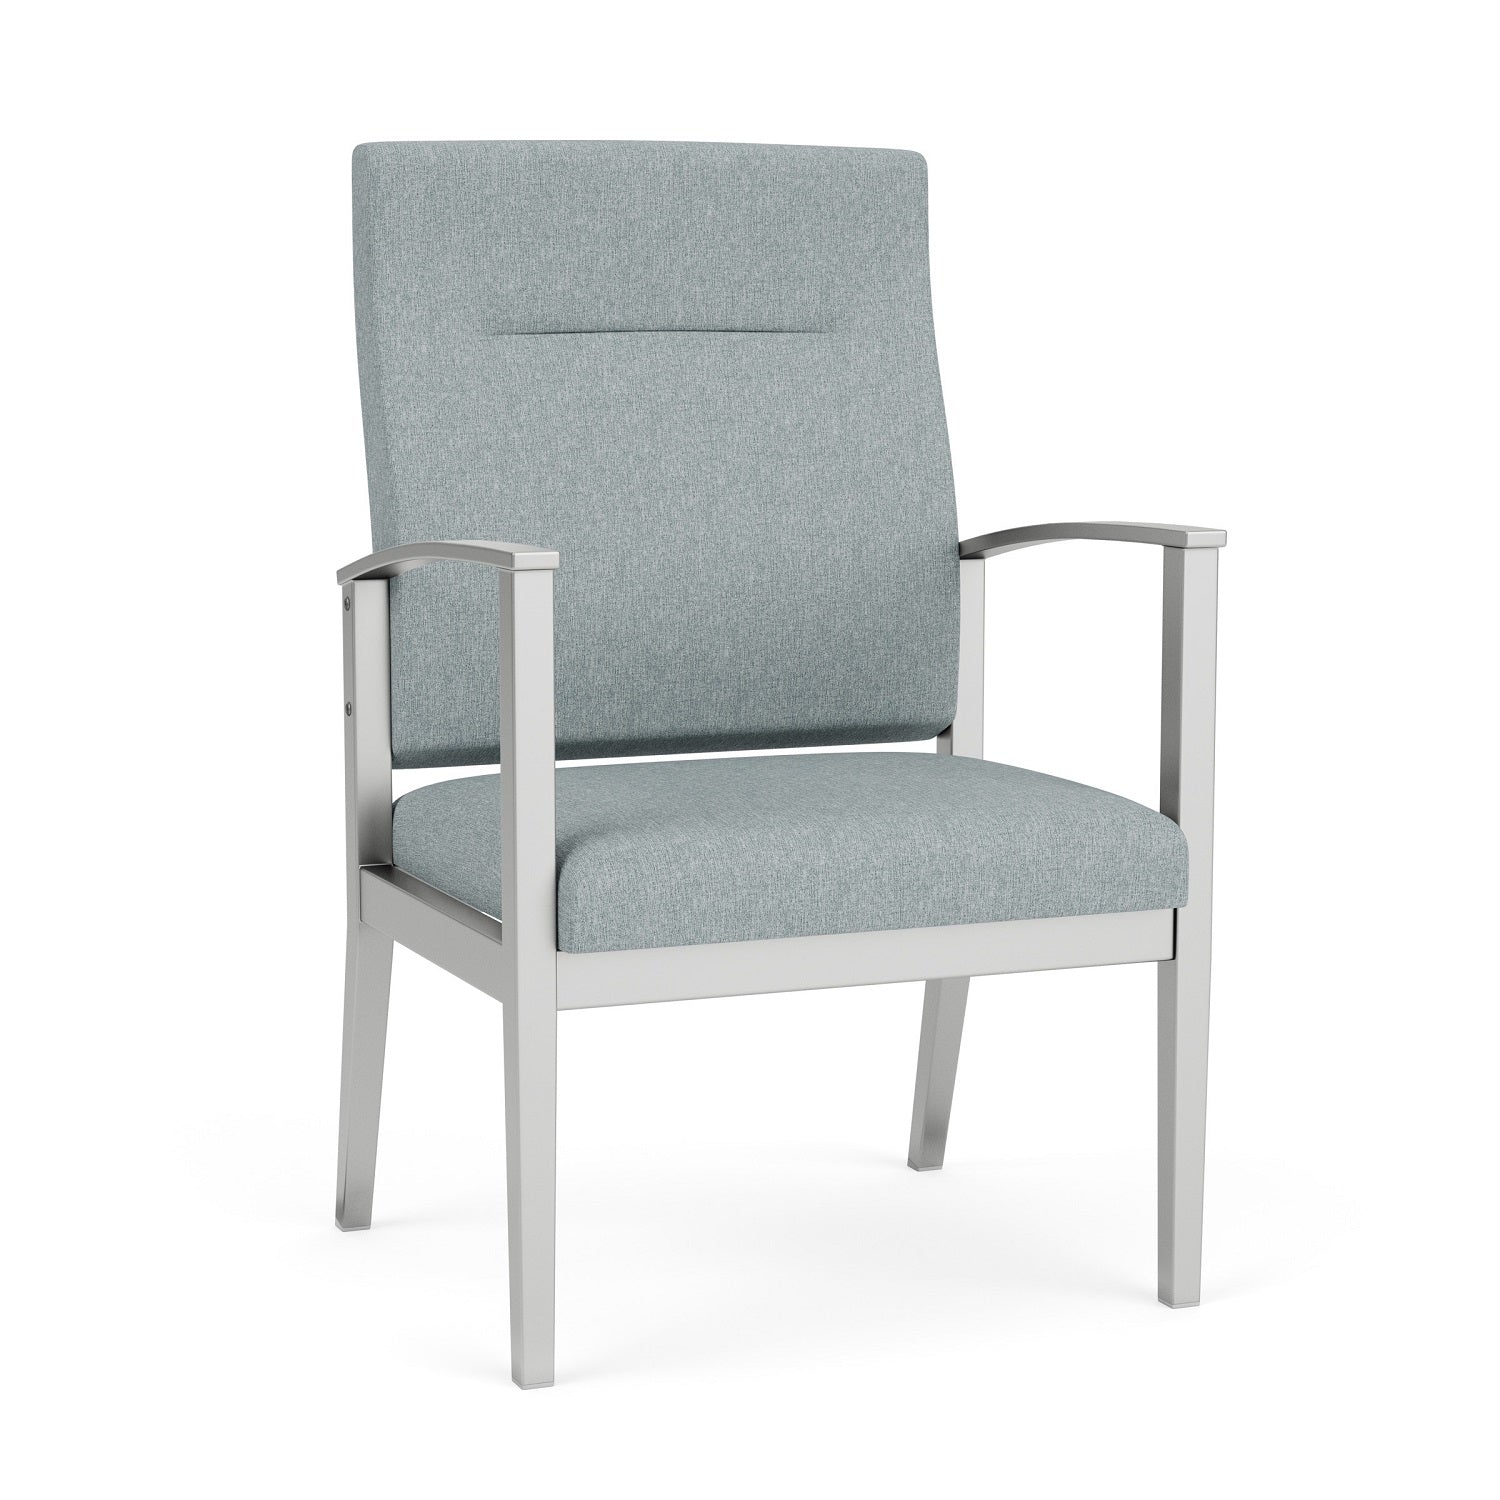 Amherst Steel Collection Reception Seating, Patient Oversize Chair, High Back, Healthcare Vinyl Upholstery, FREE SHIPPING